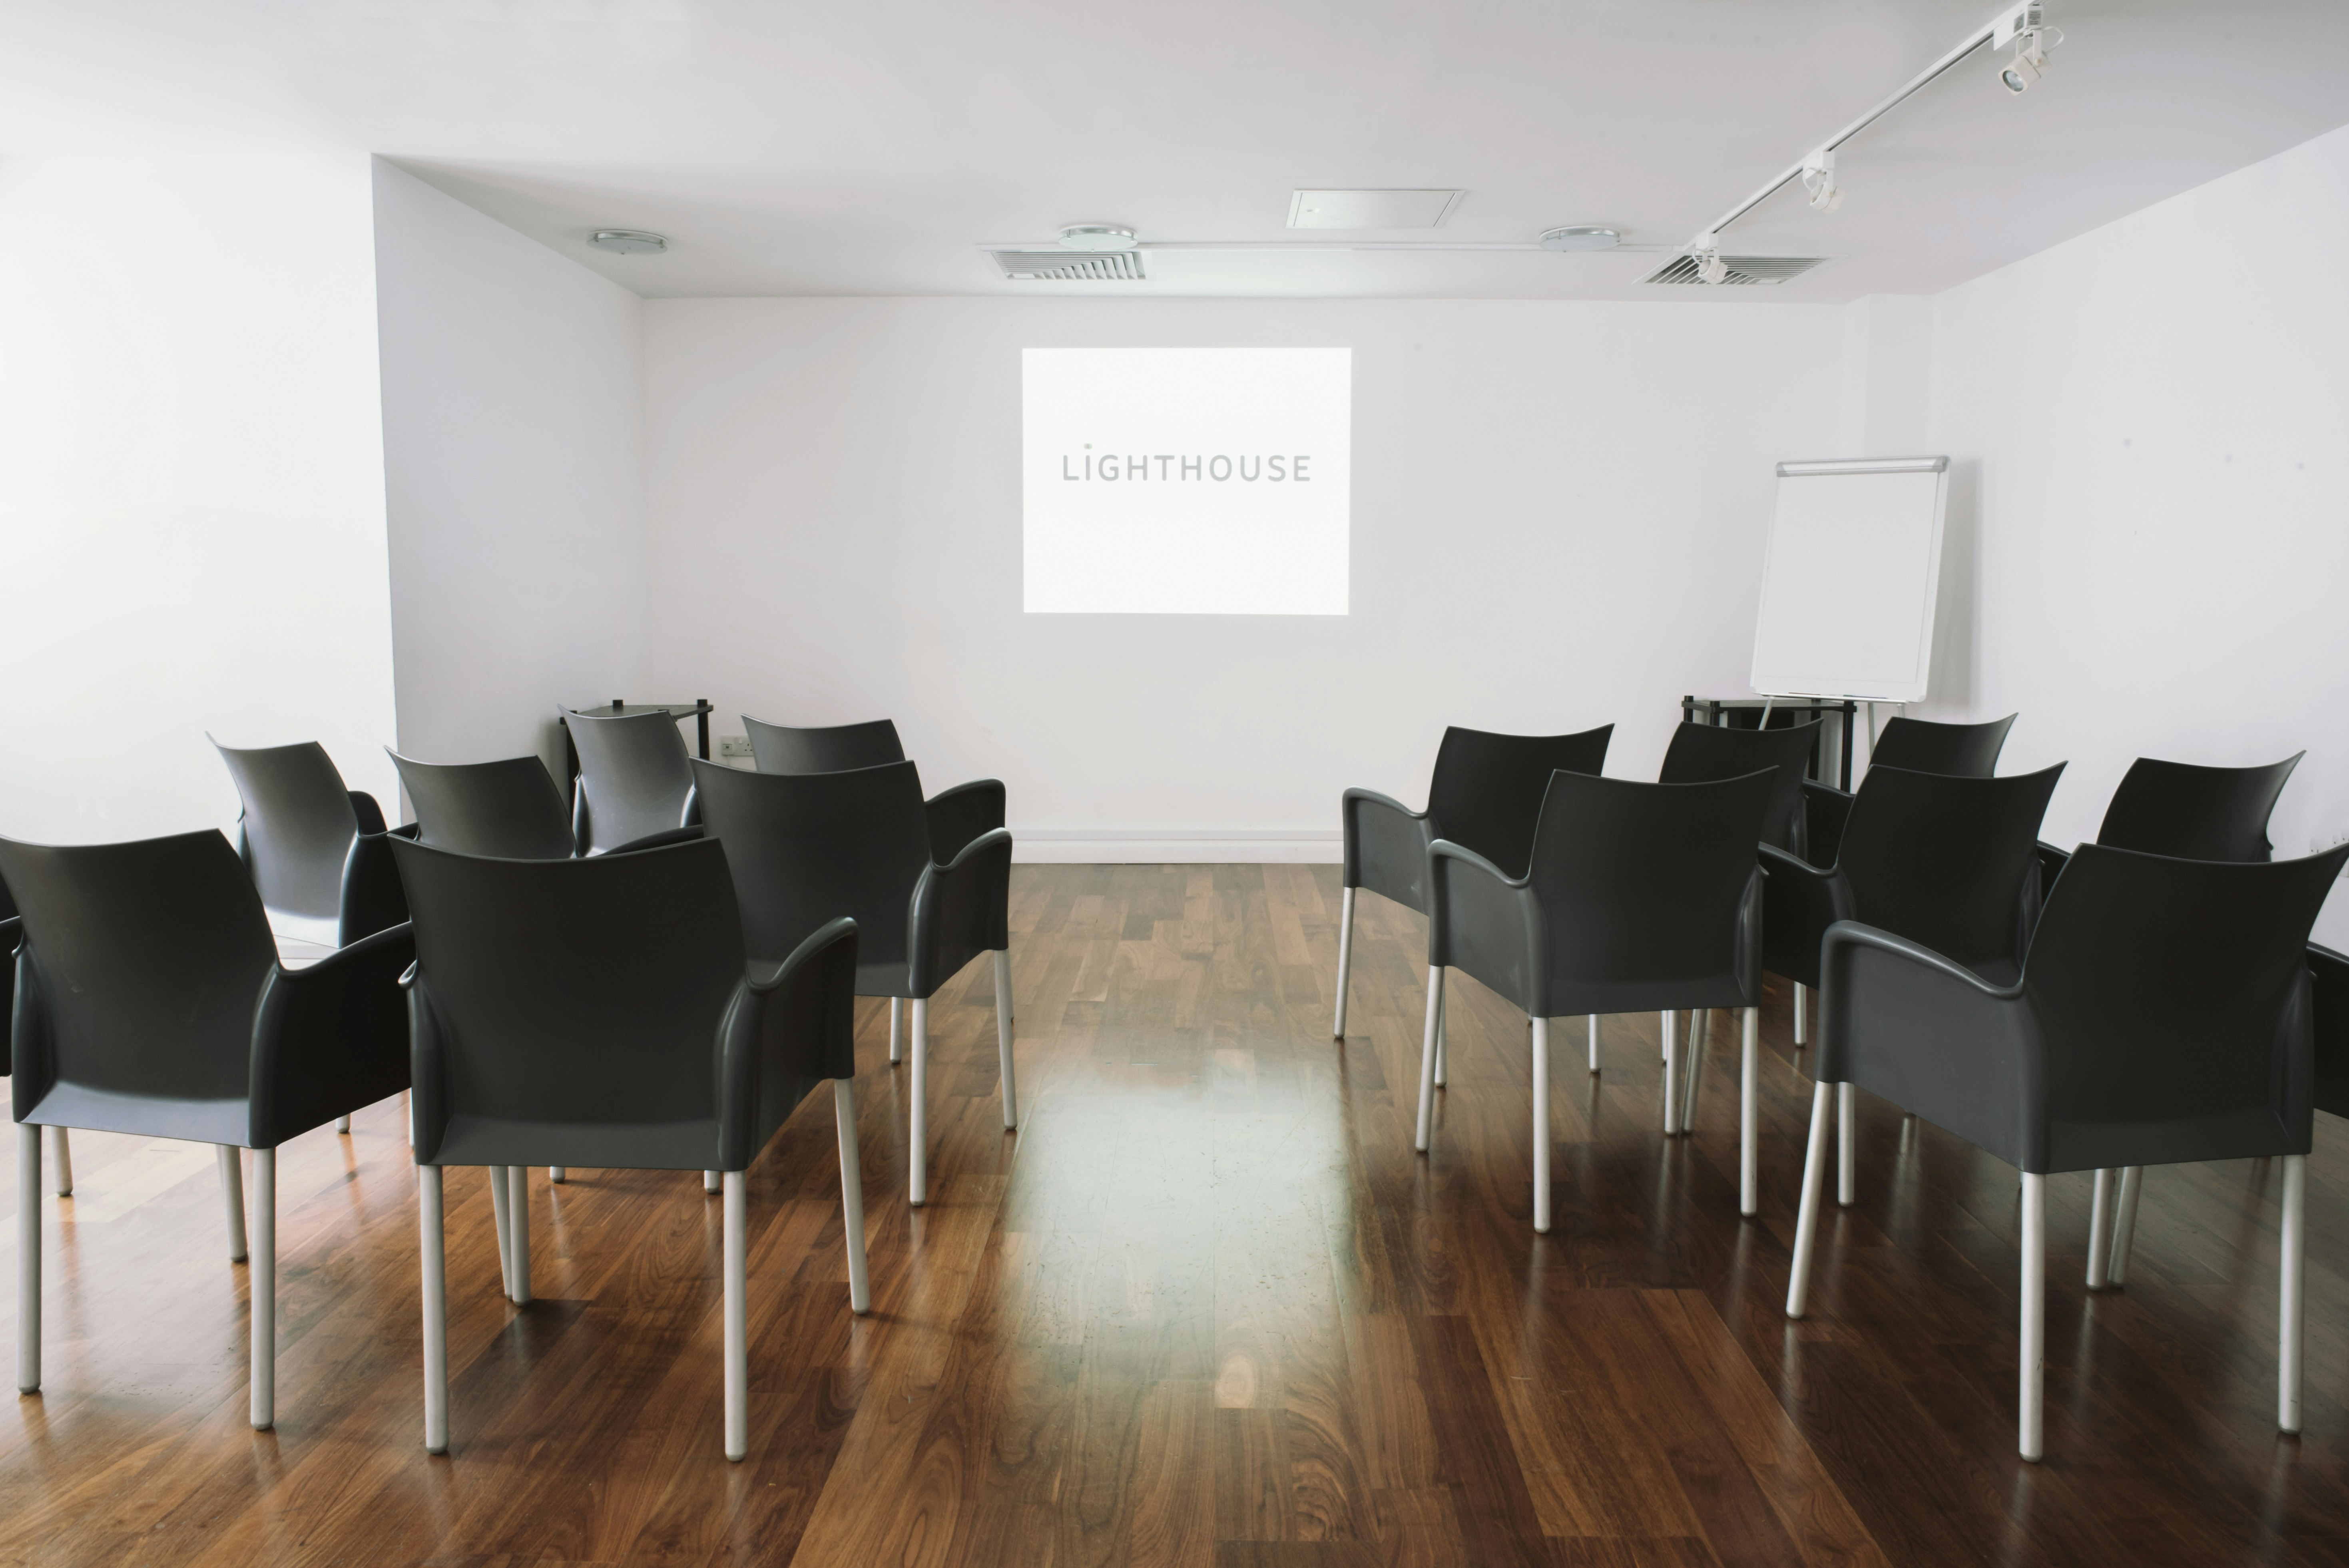 Lighthouse - Conference Room image 2